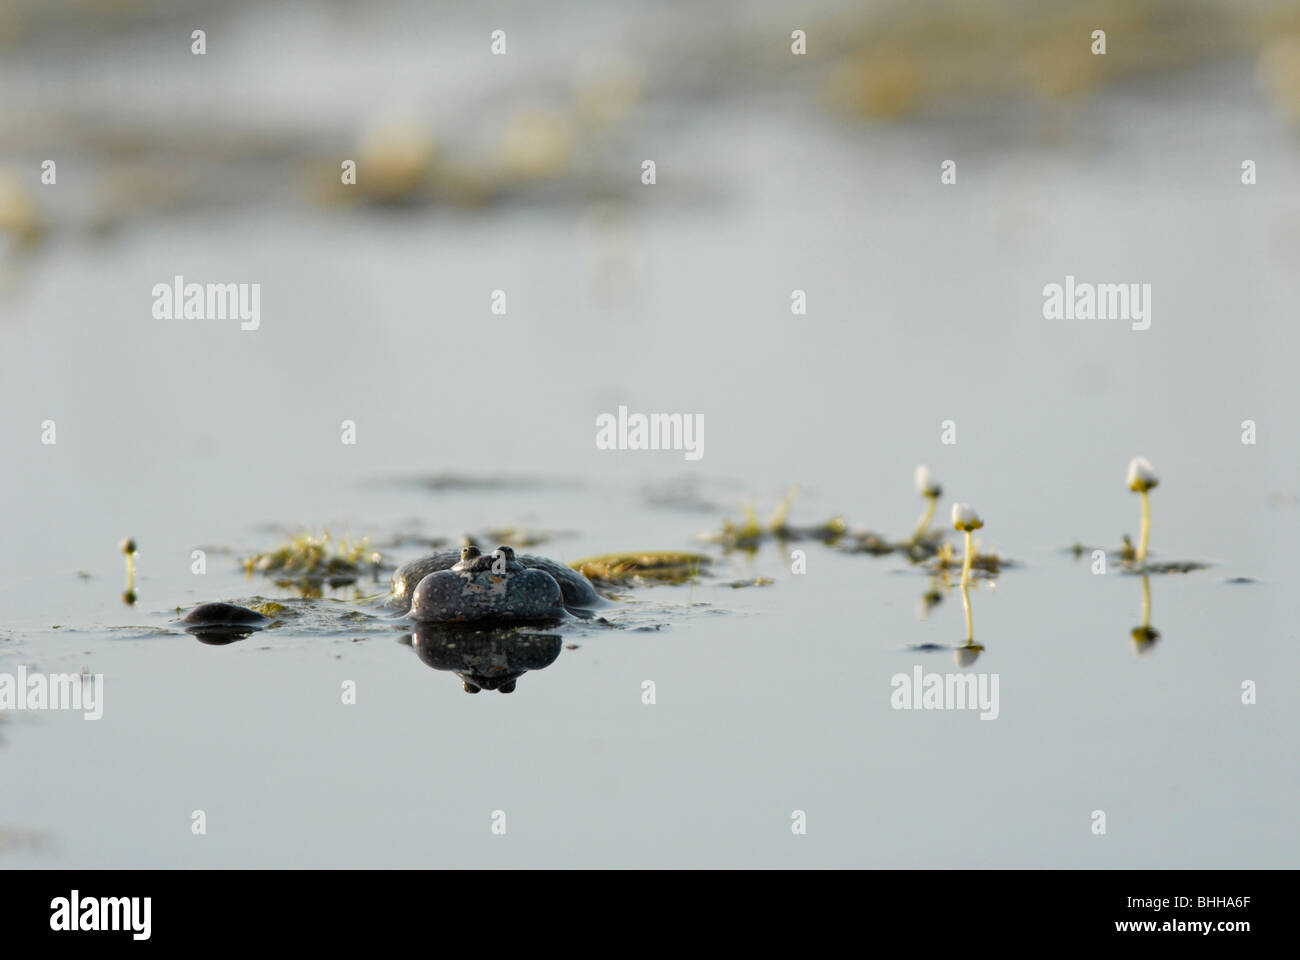 Frog playing in the water, Sweden. Stock Photo